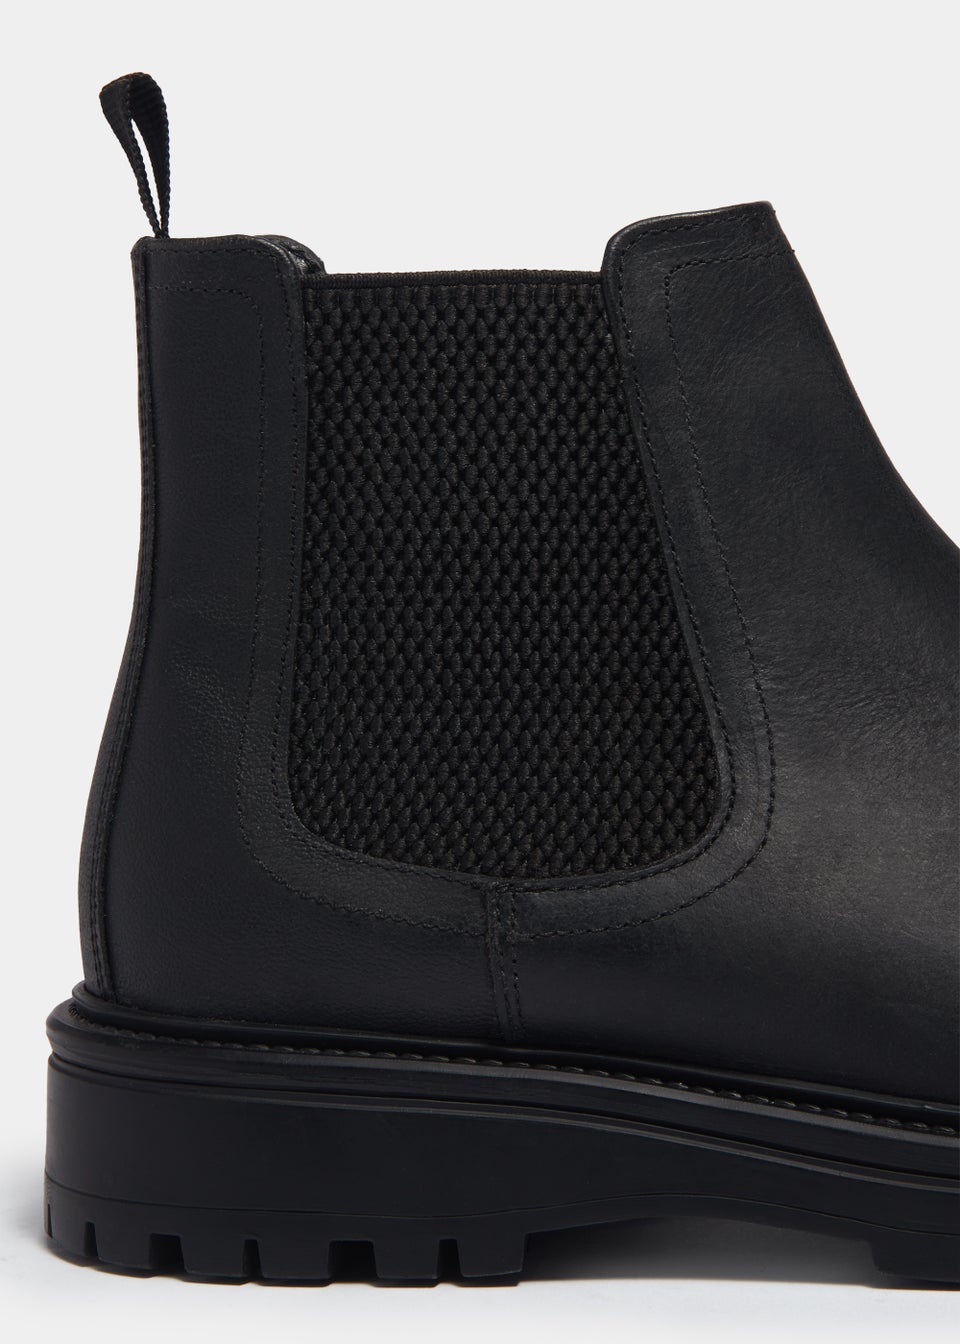 Black Leather Cleated Chelsea Boots